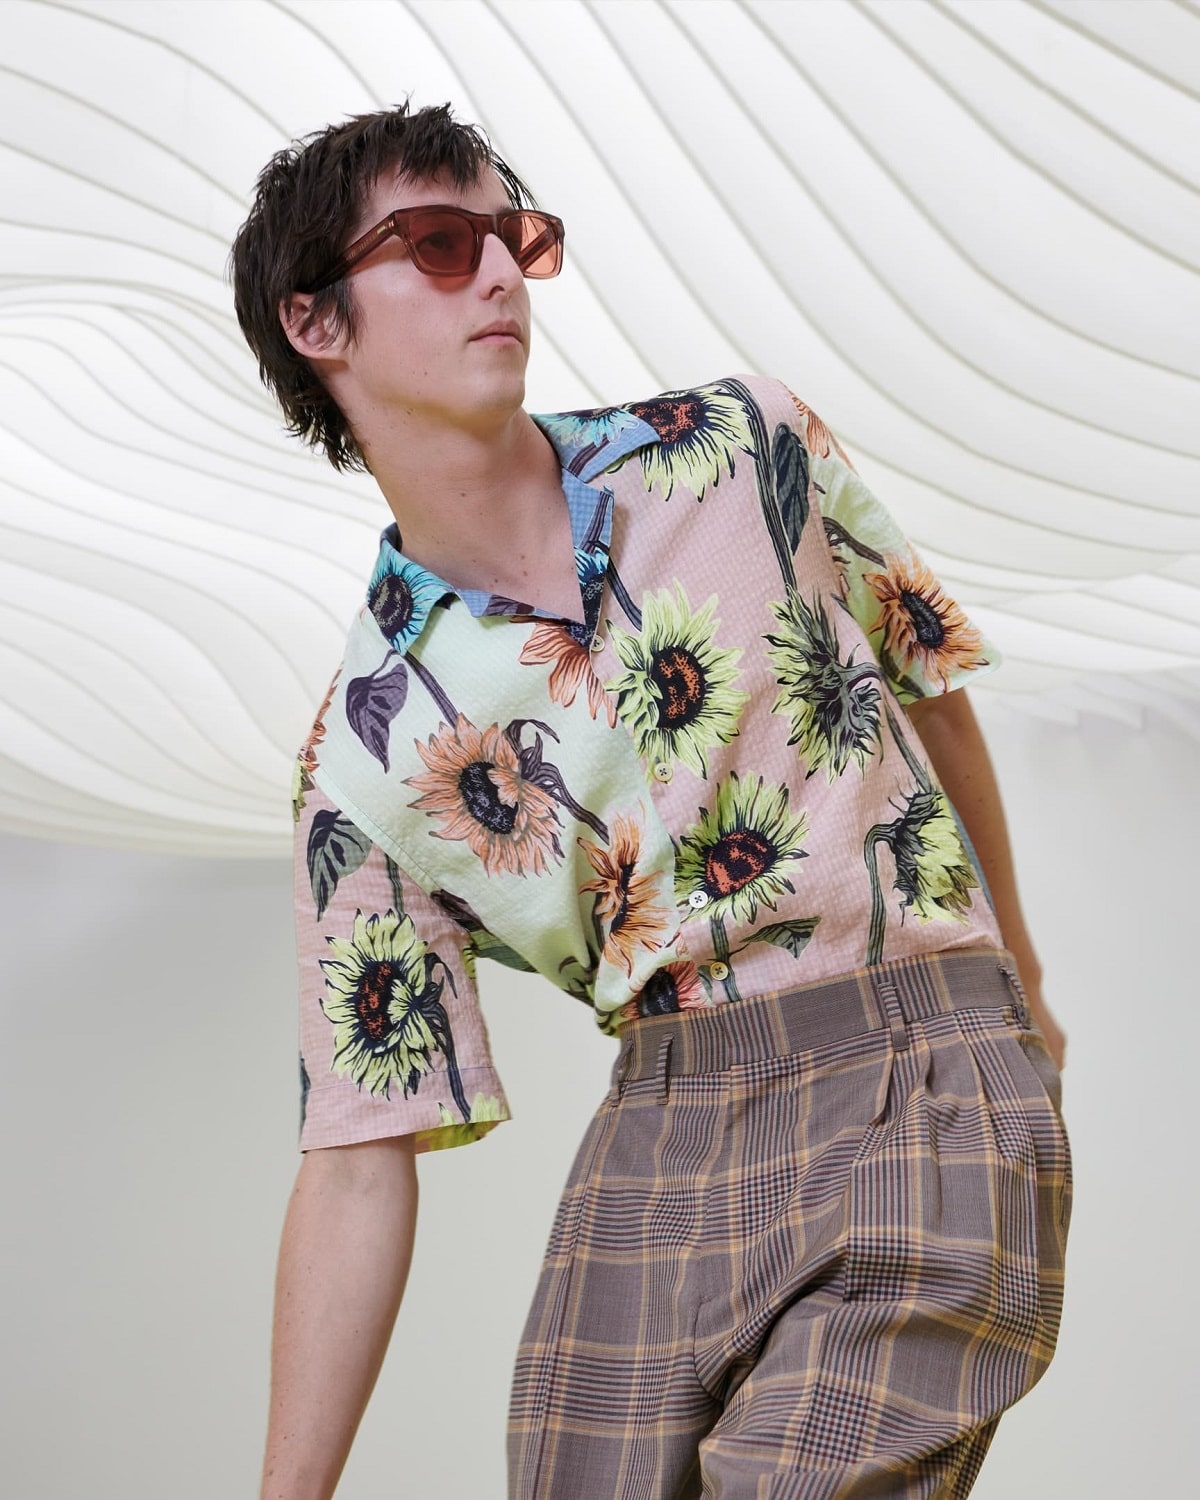 Menswear is Seeing a Return to the 1980s